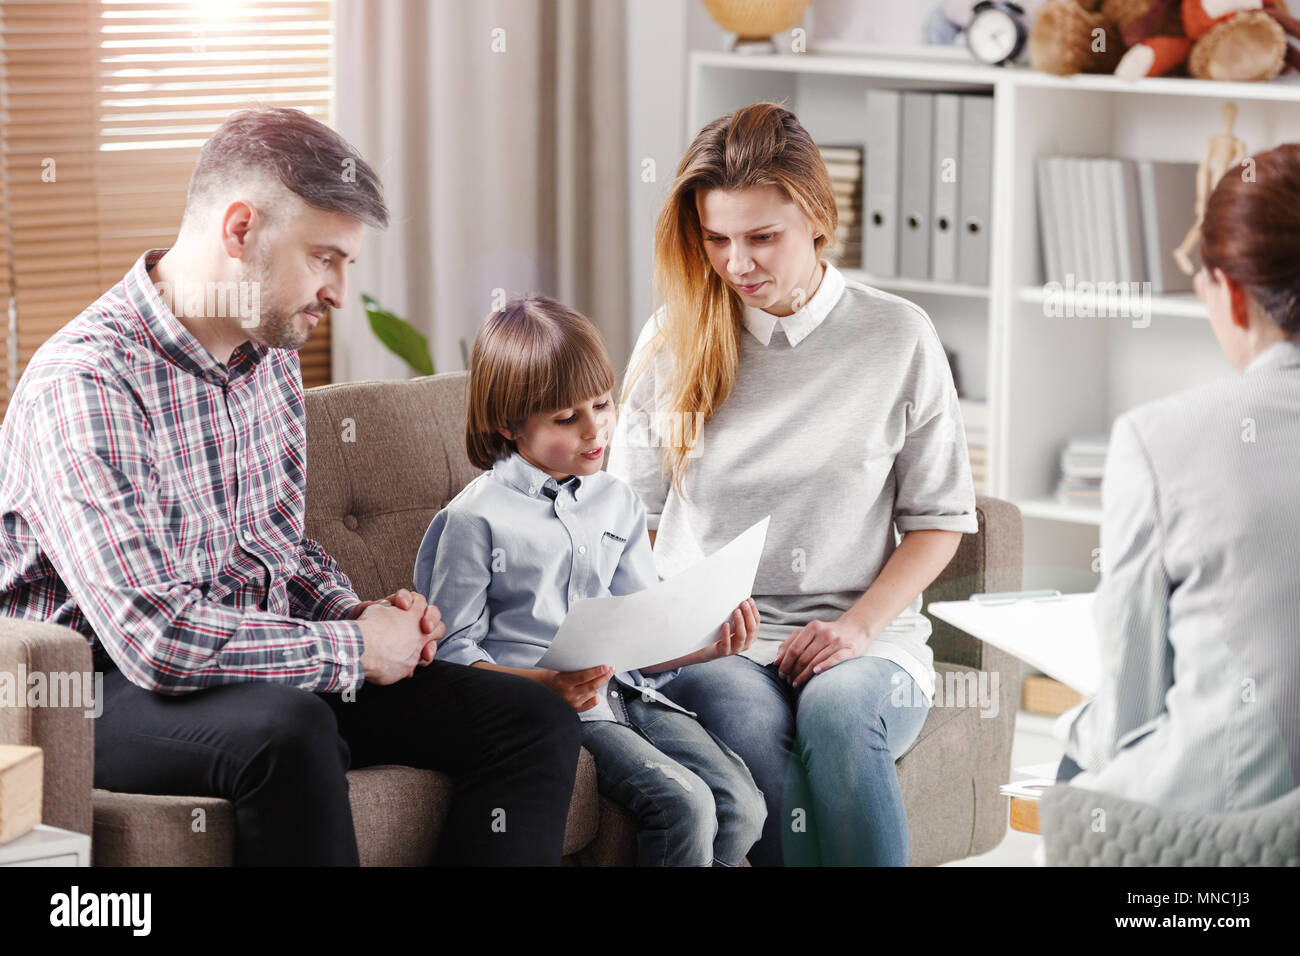 Autistic boy describing a picture while sitting with his parents during consultation with therapist Stock Photo